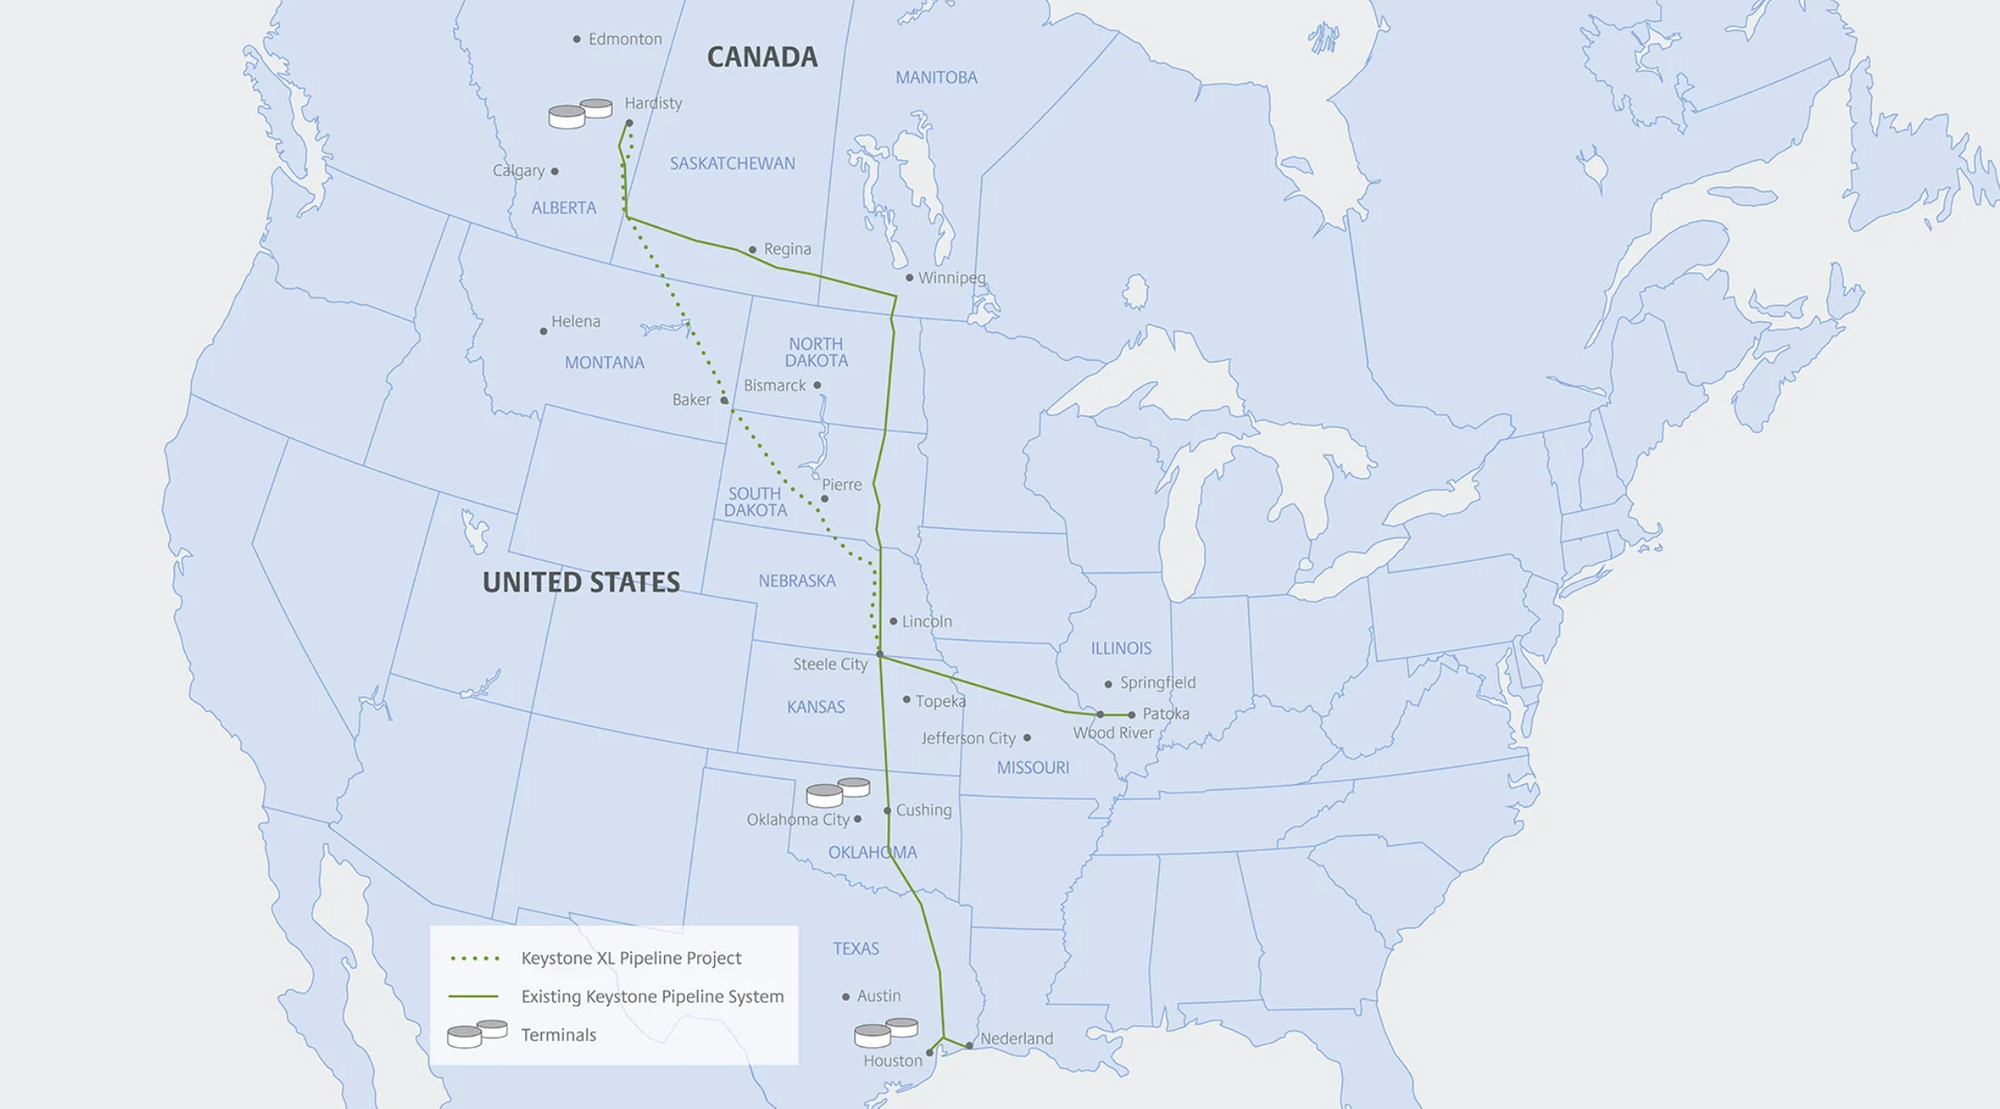 Map of Keystone and XL Pipeline from Canada to Houston Texas. Source: Keystone XL